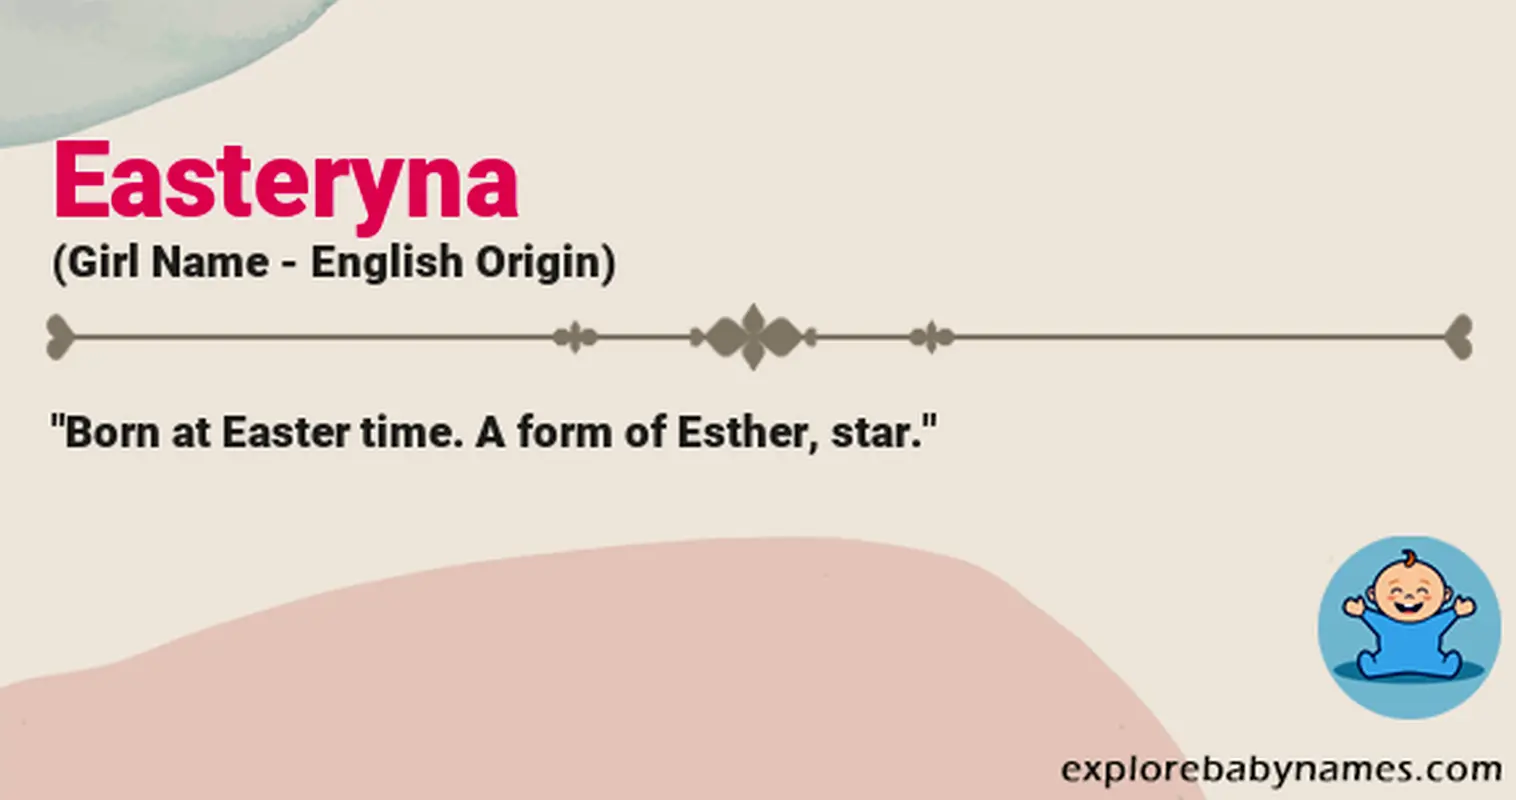 Meaning of Easteryna